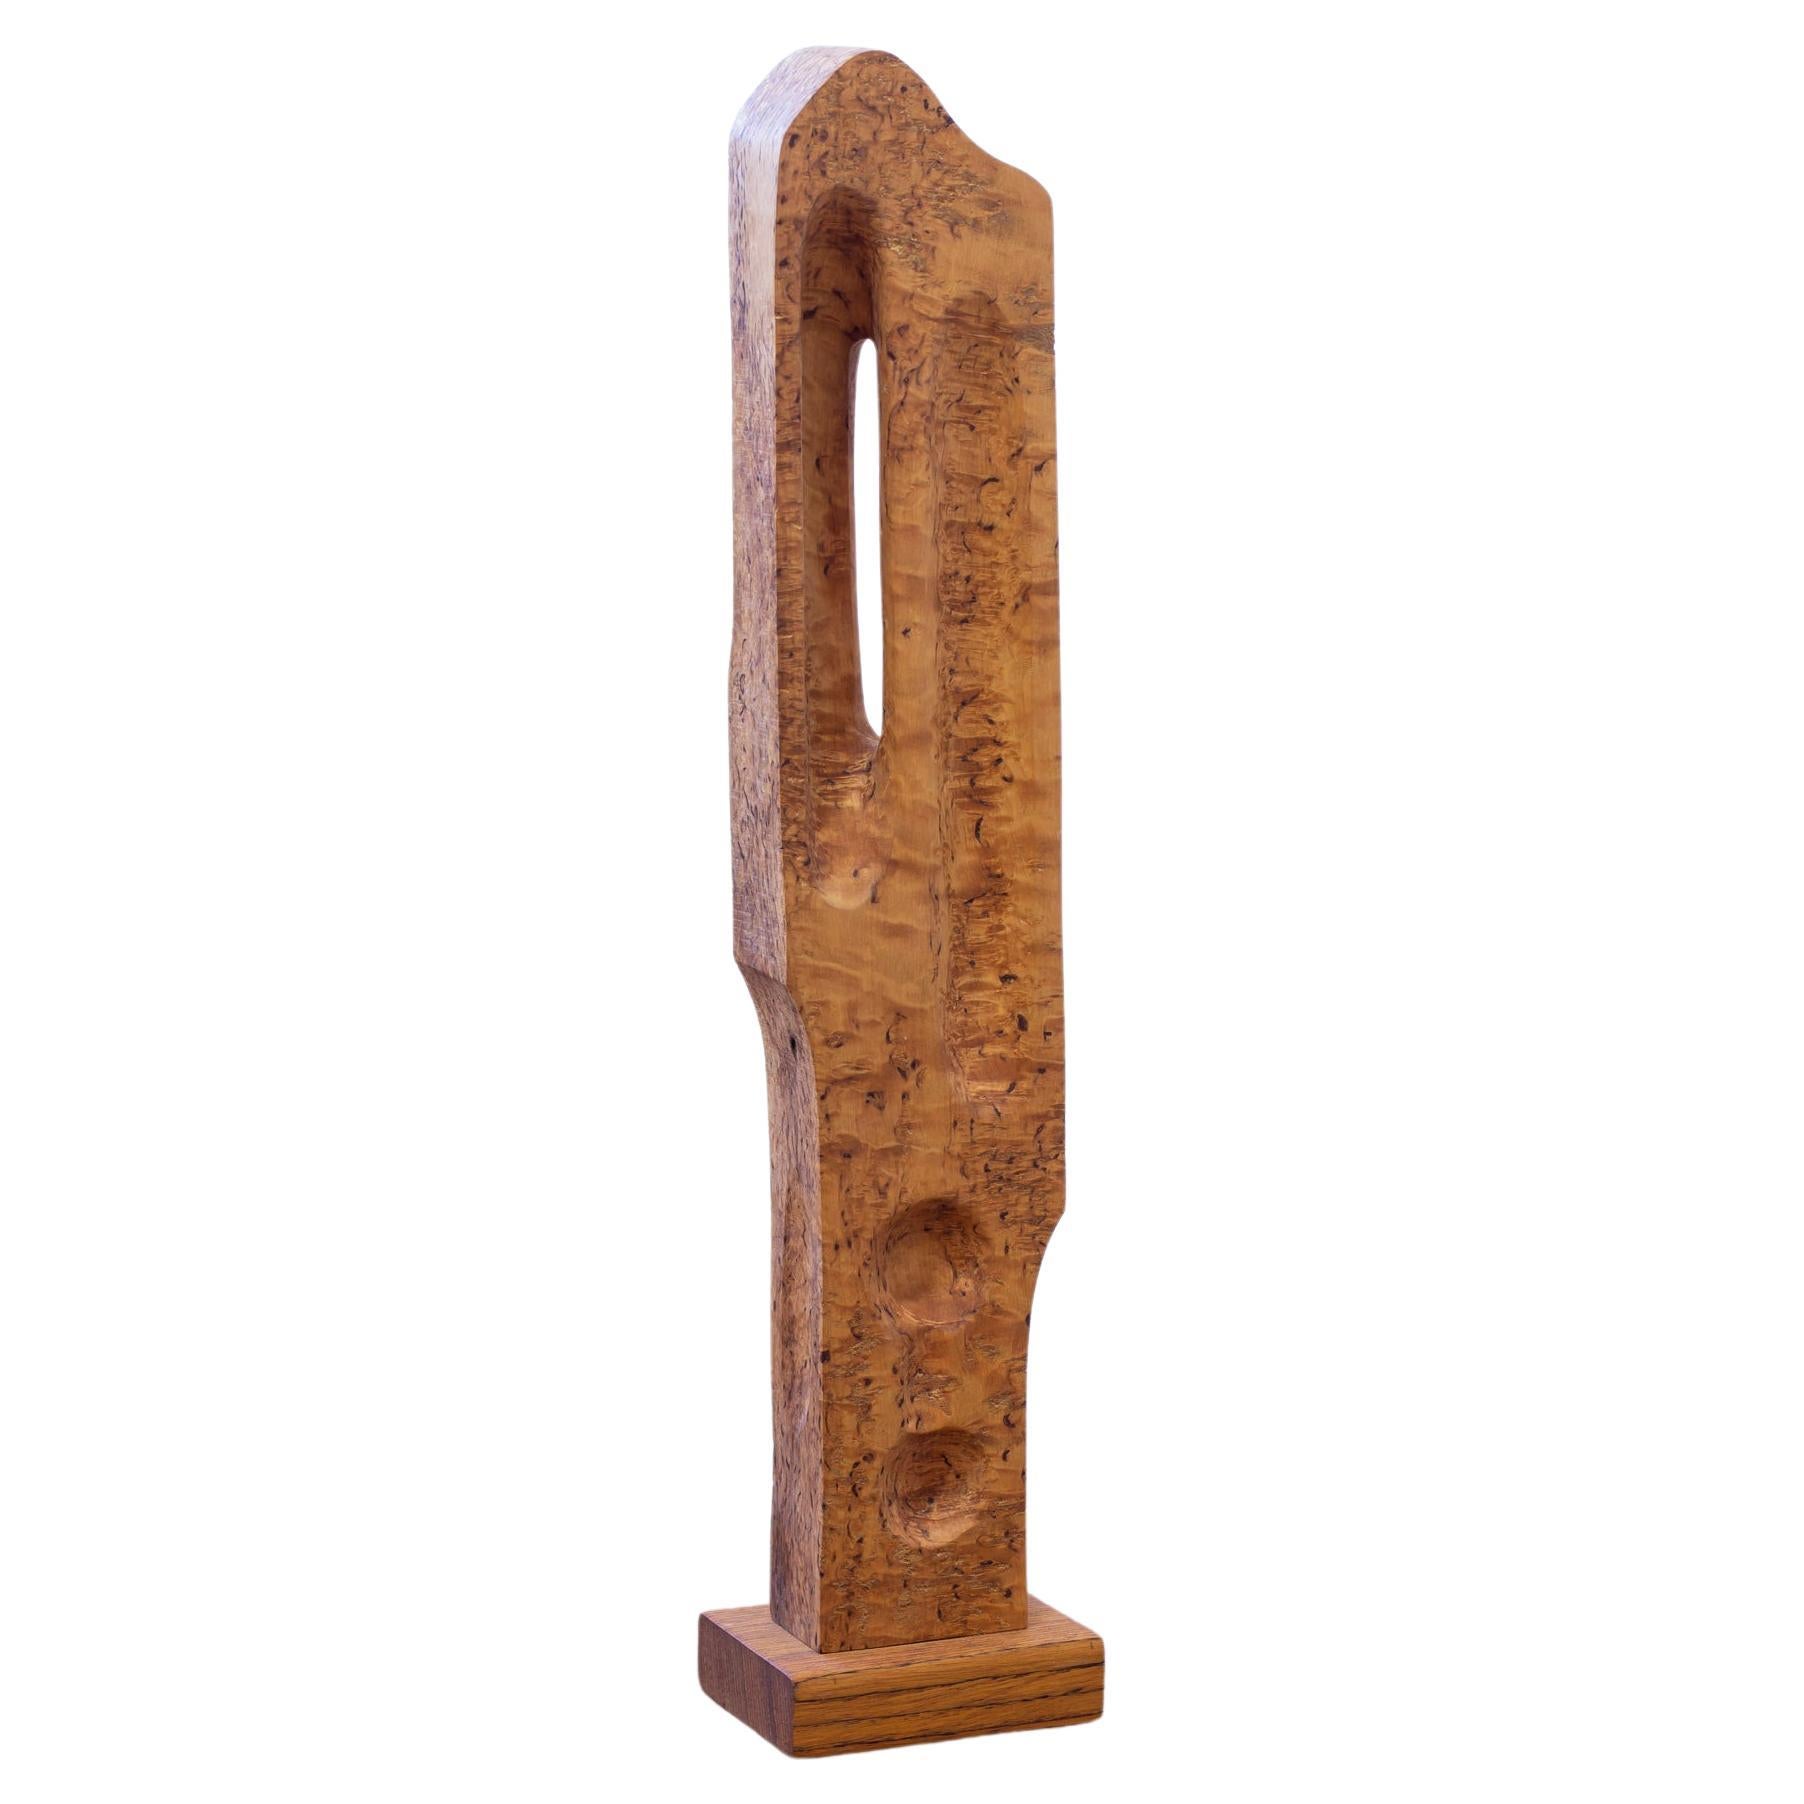 Abstract burl birch sculpture by Sven Olsson For Sale